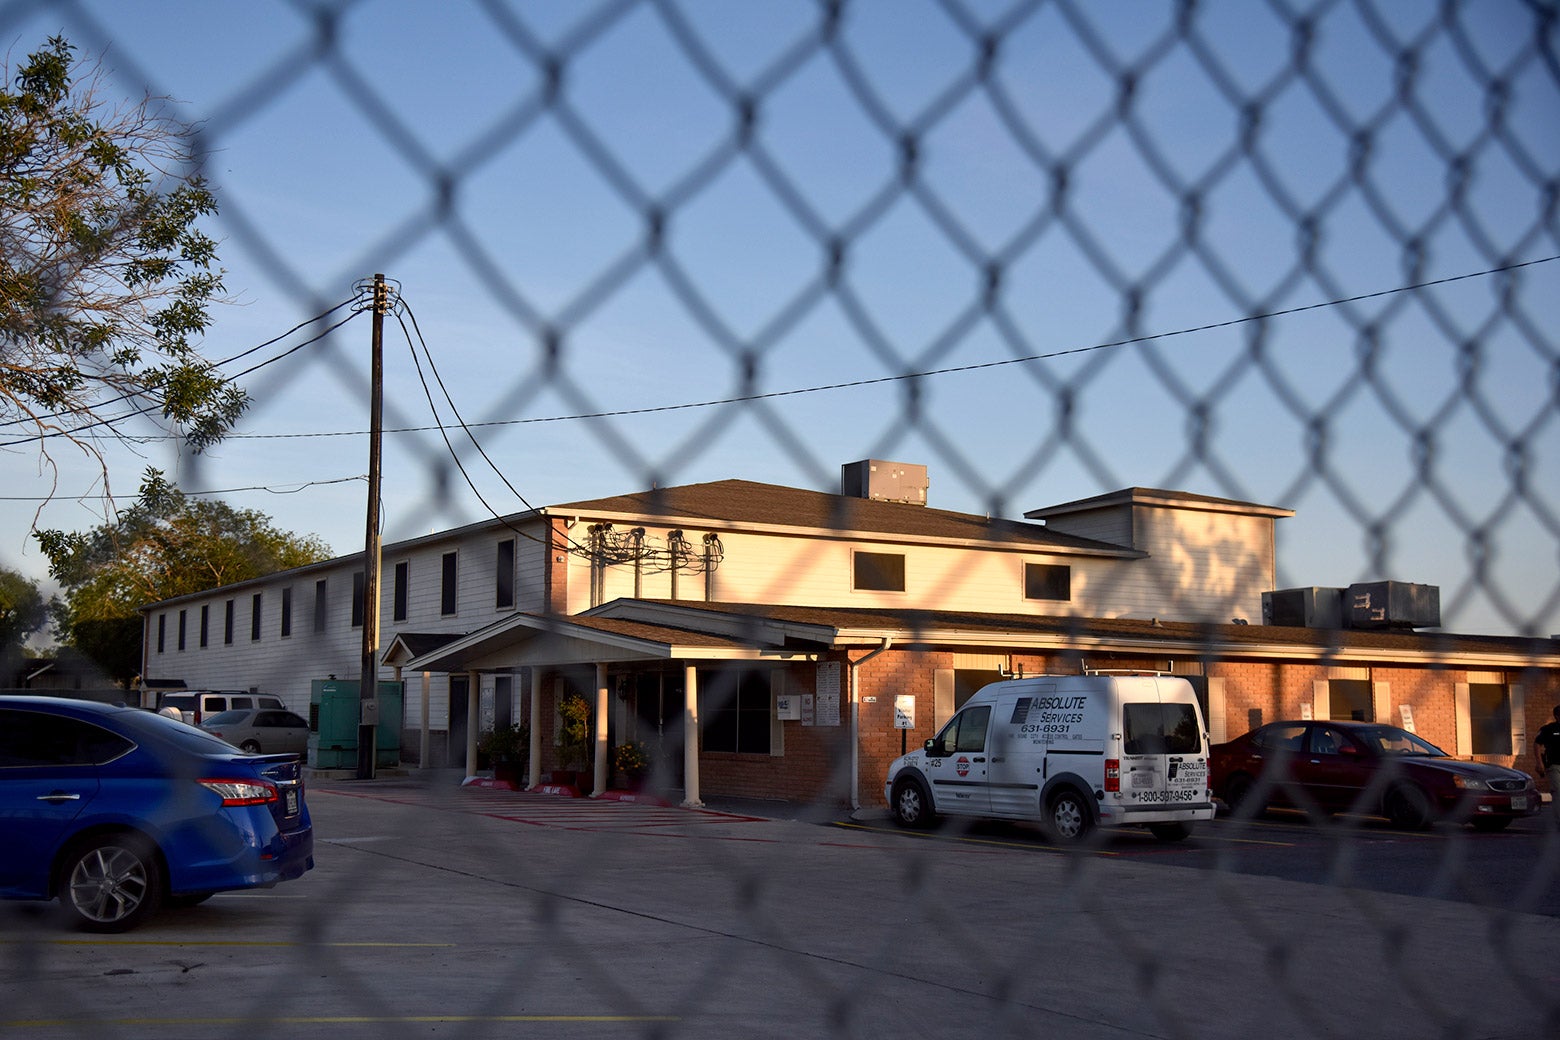 Casa Antigua is a facility run by Southwest Key Programs that houses immigrant children who have been separated from their families, as seen on June 22 in San Benito, Texas.